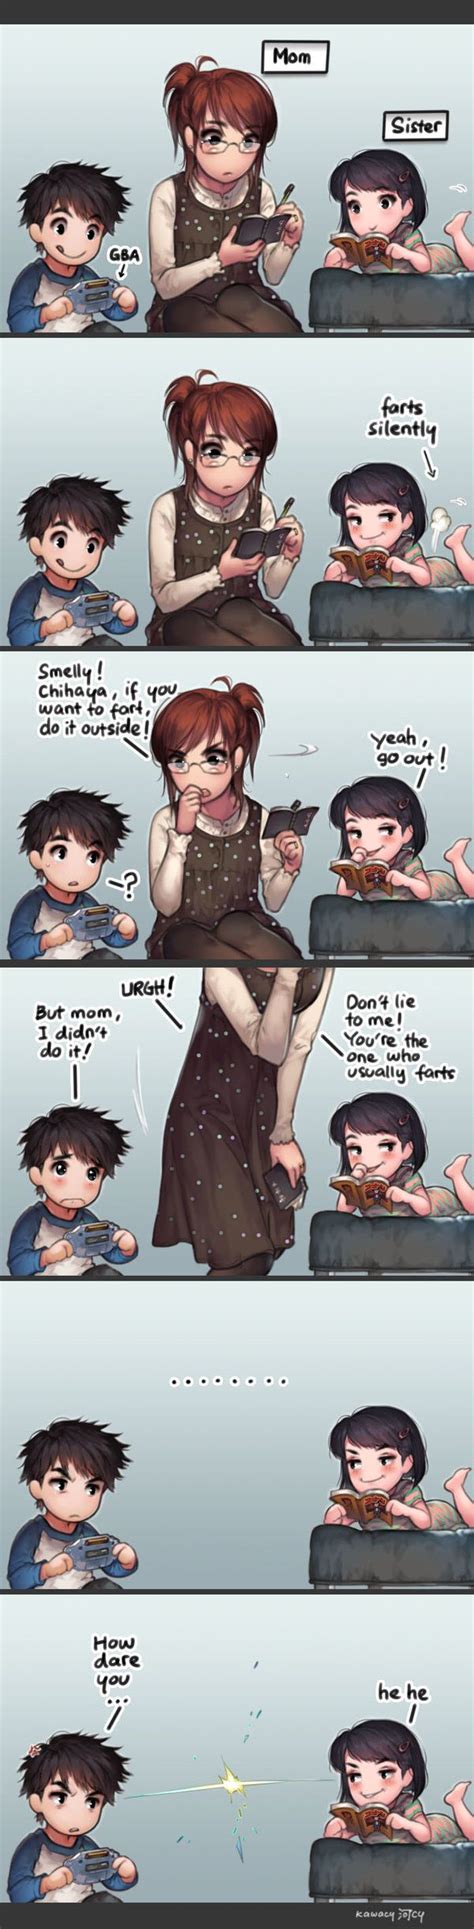 Who The Heck Farted By Kawacy On Deviantart Funny Comics Cute Comics Funny Cute